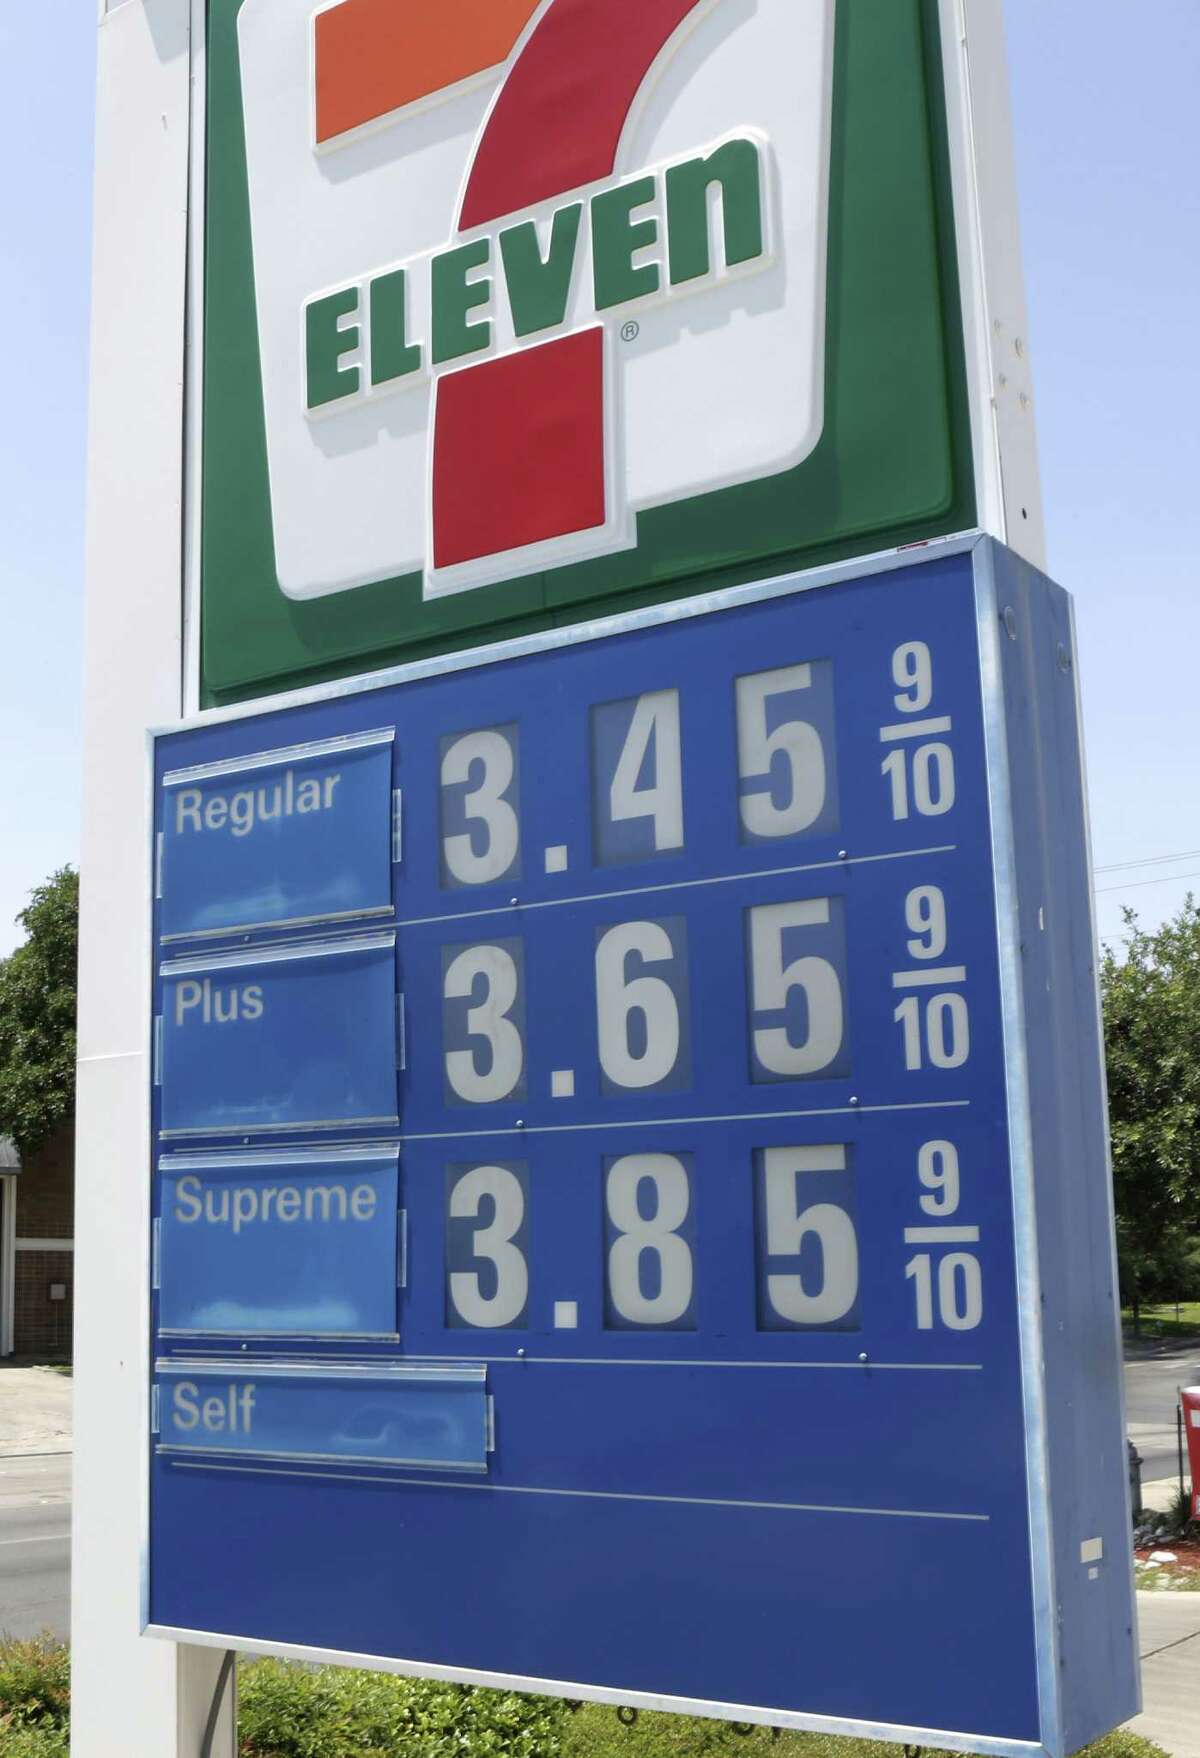 S.A.'s average price for unleaded increased less than a penney in the past week.